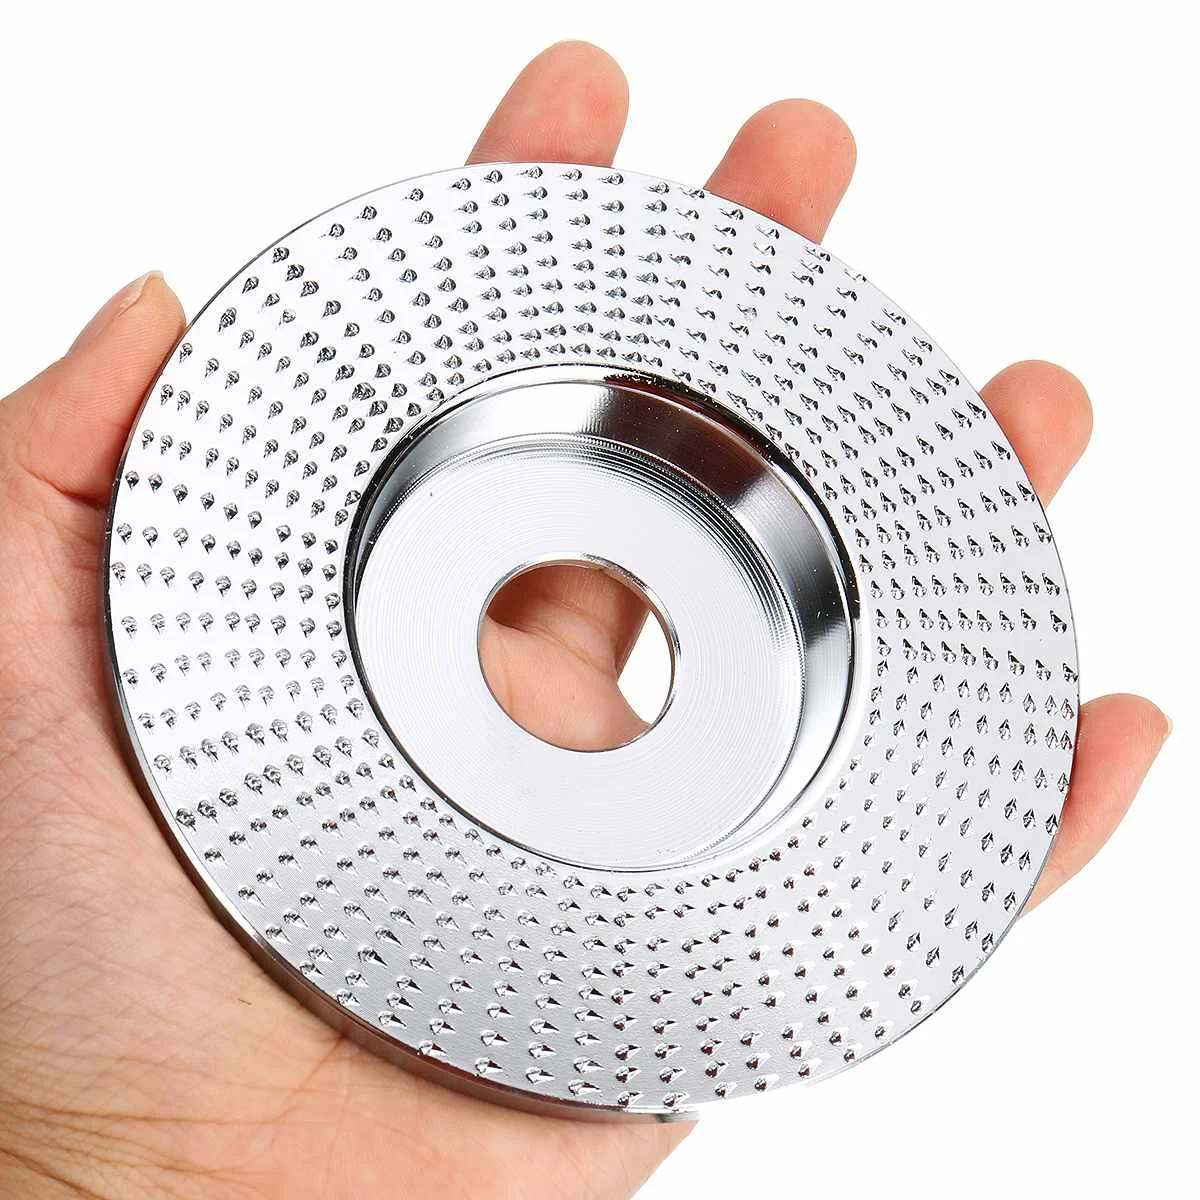 

High Quanlity Wood Grinding Wheel Rotary Disc Sanding Wood Carving Tool Abrasive Disc Tools For Angle Grinder 16/22mm Bore